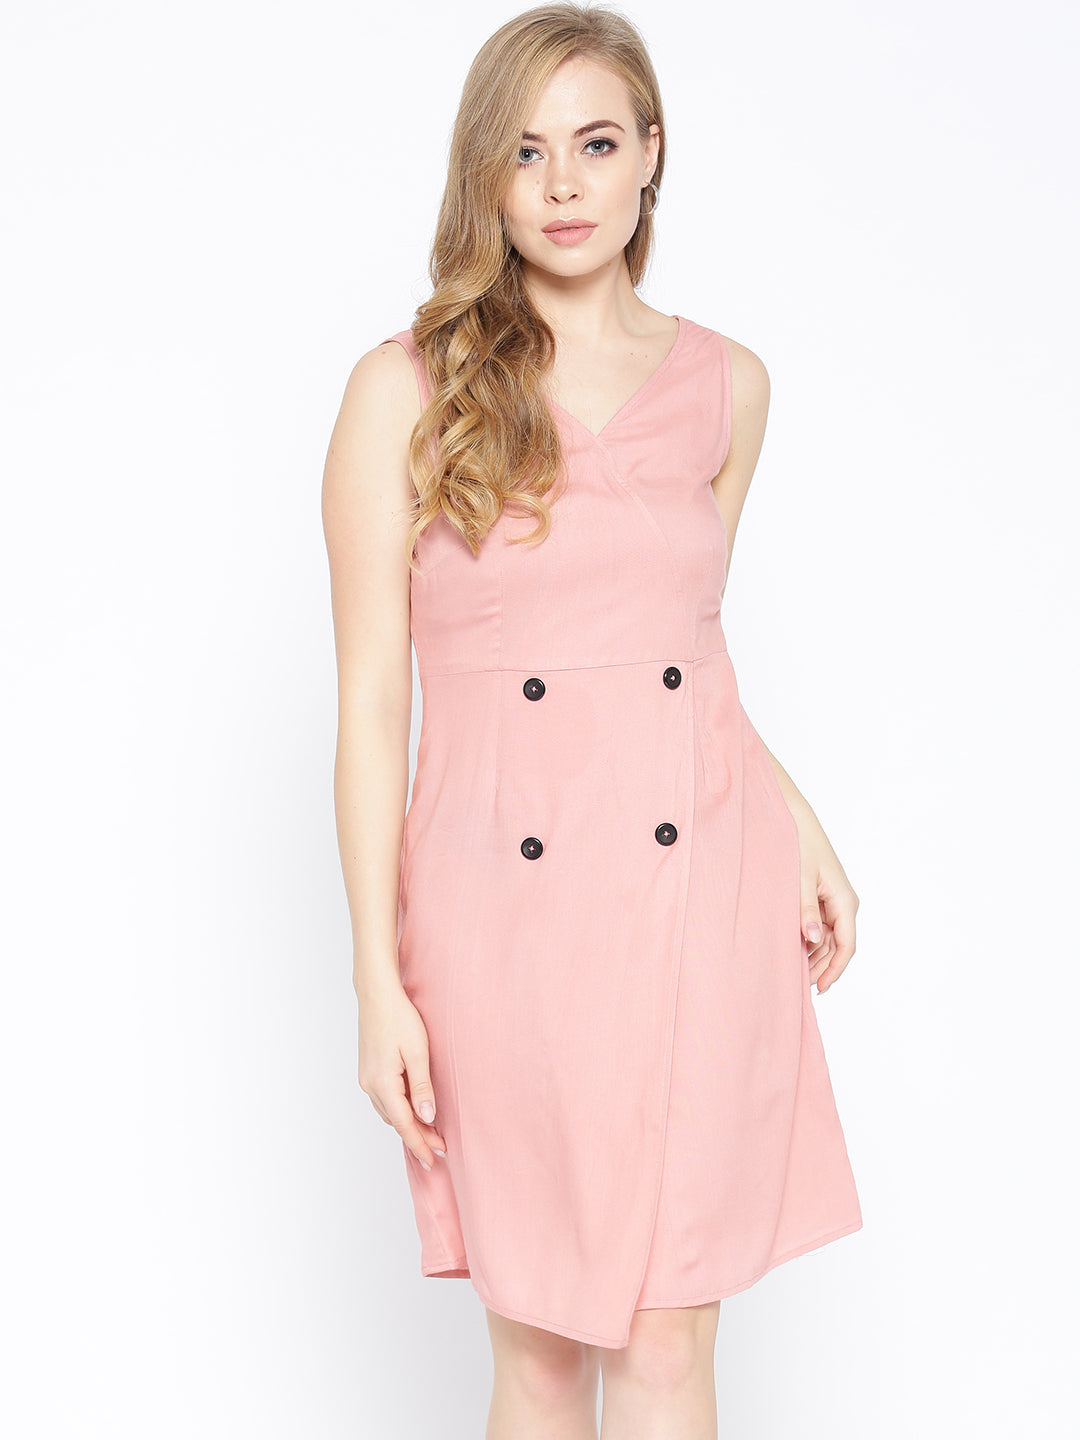 Slim Fit Dress with four buttons